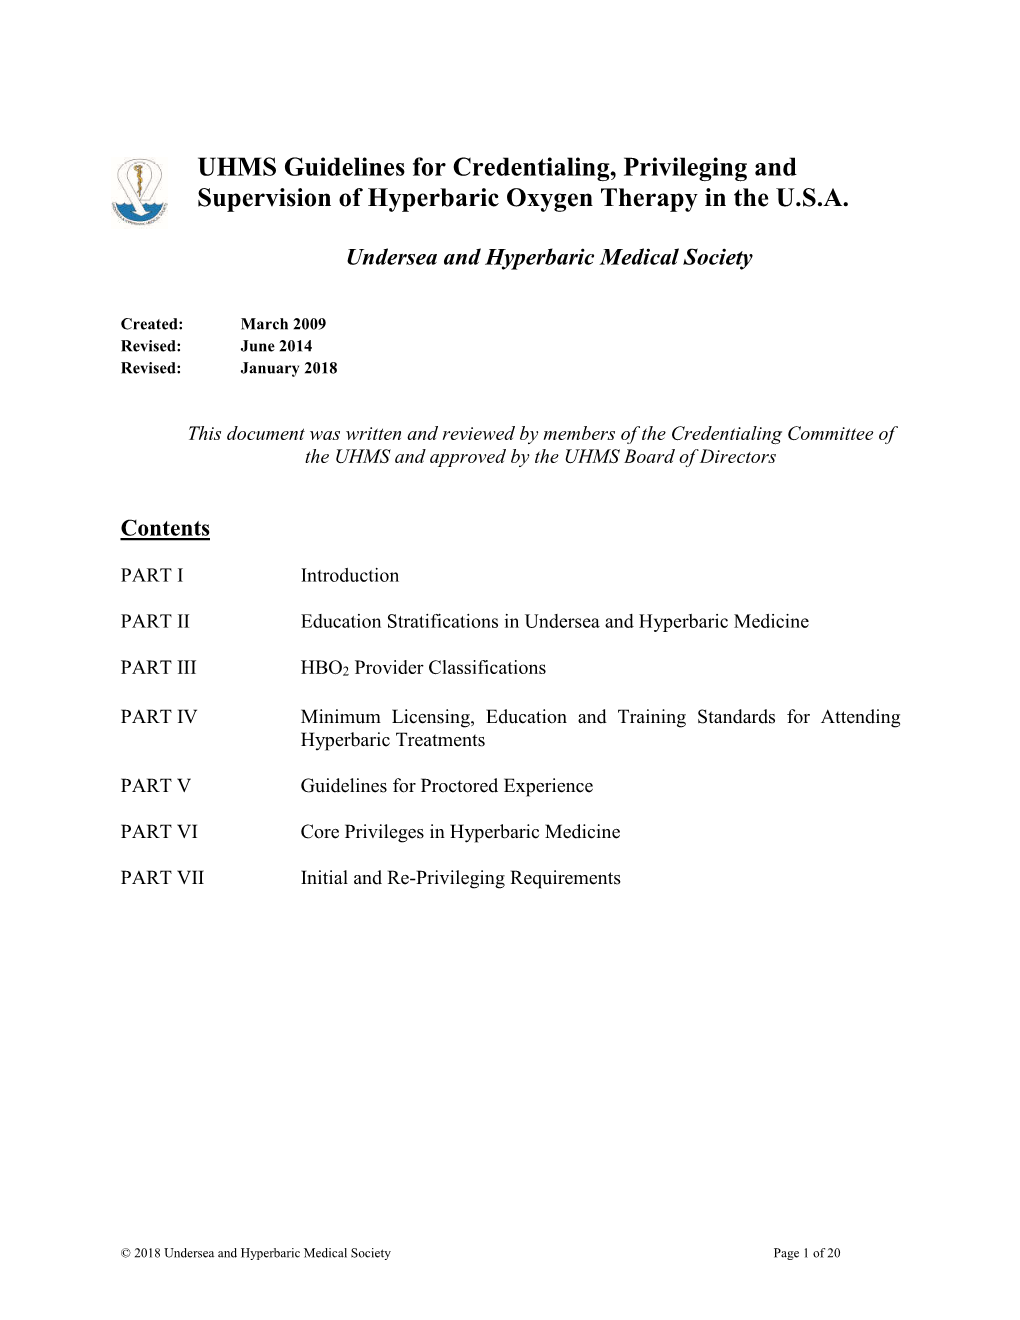 UHMS Guidelines for Credentialing, Privileging and Supervision of Hyperbaric Oxygen Therapy in the U.S.A